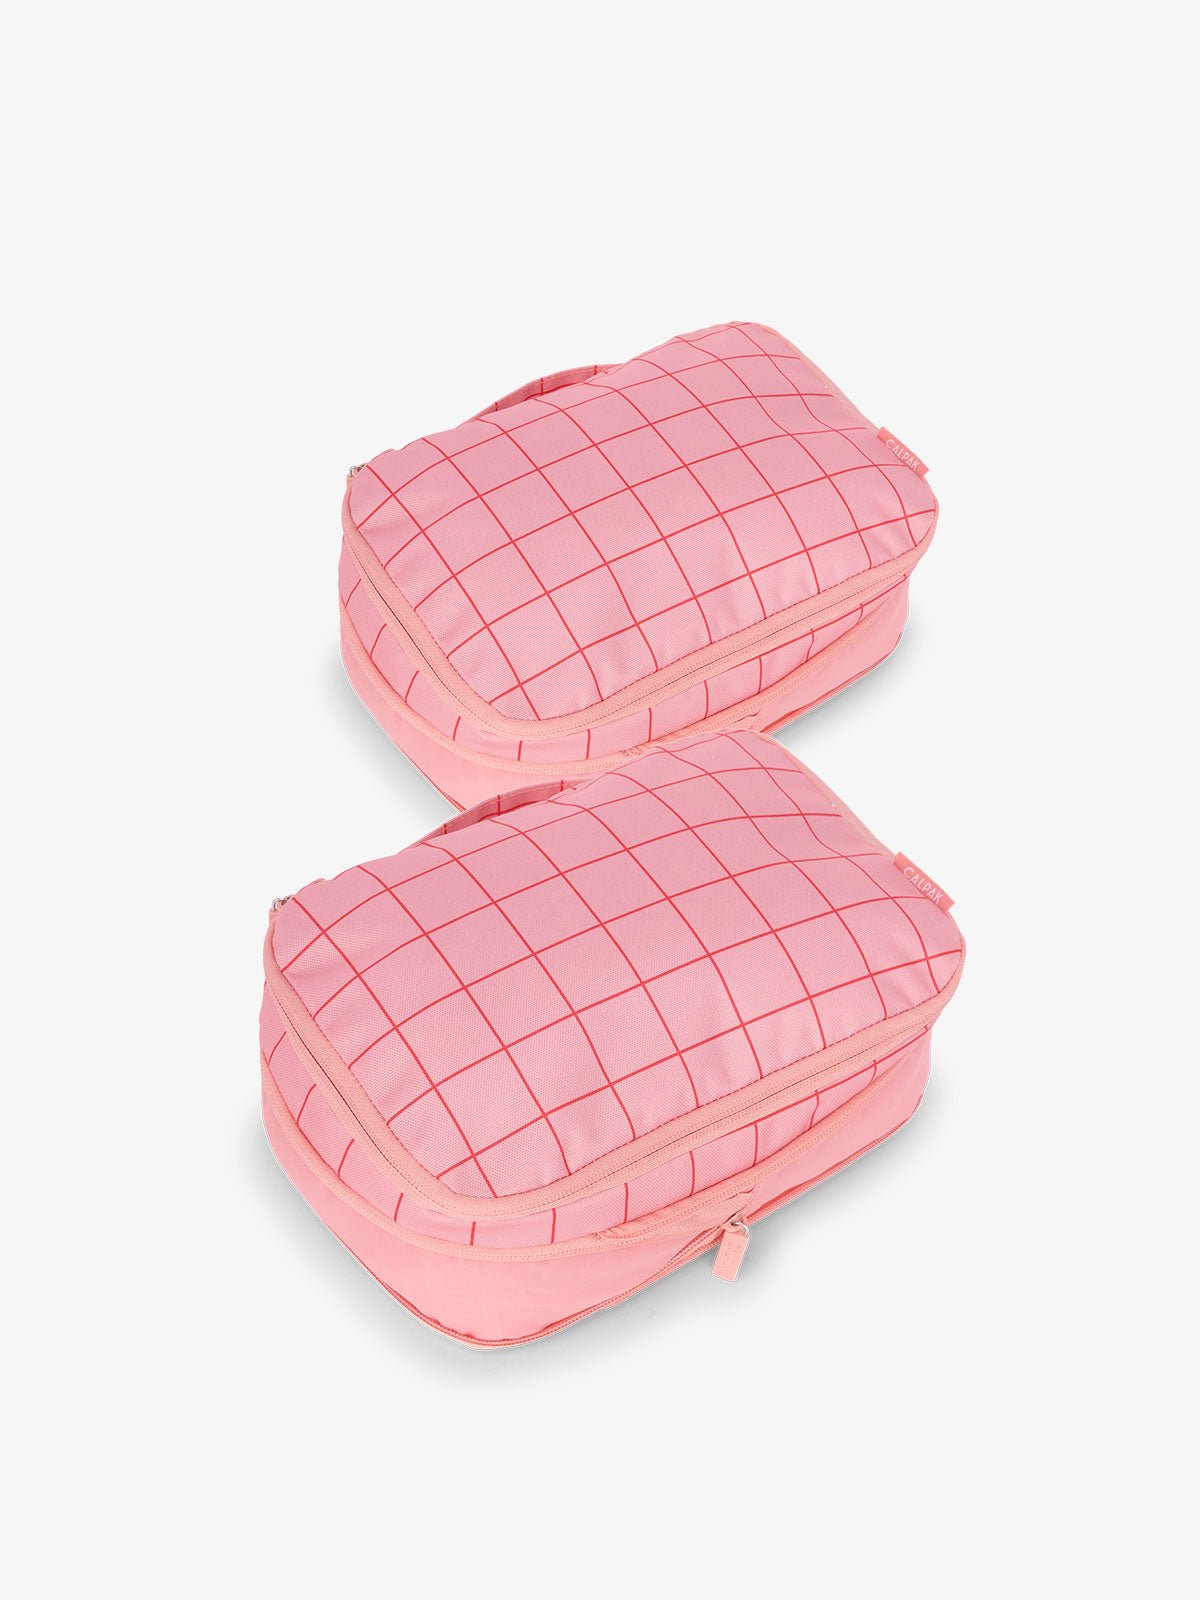 CALPAK small compression packing cubes with top handles and expandable by 4.5 inches in pink and red grid print